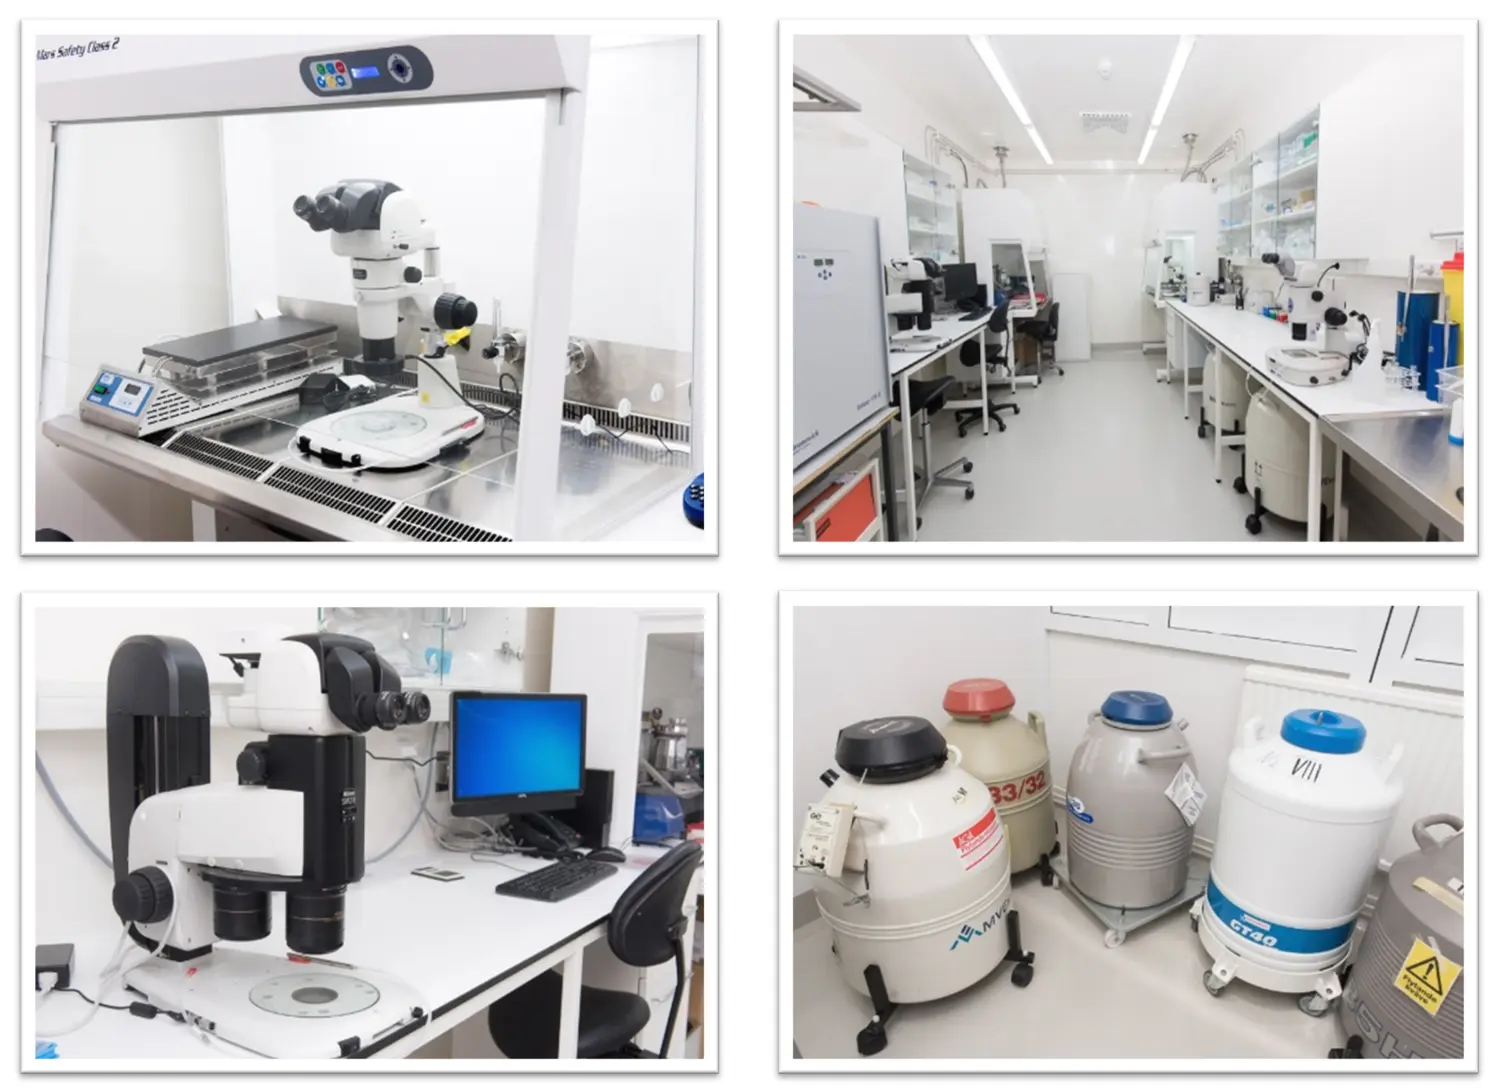 Four images showing lab and equipment.